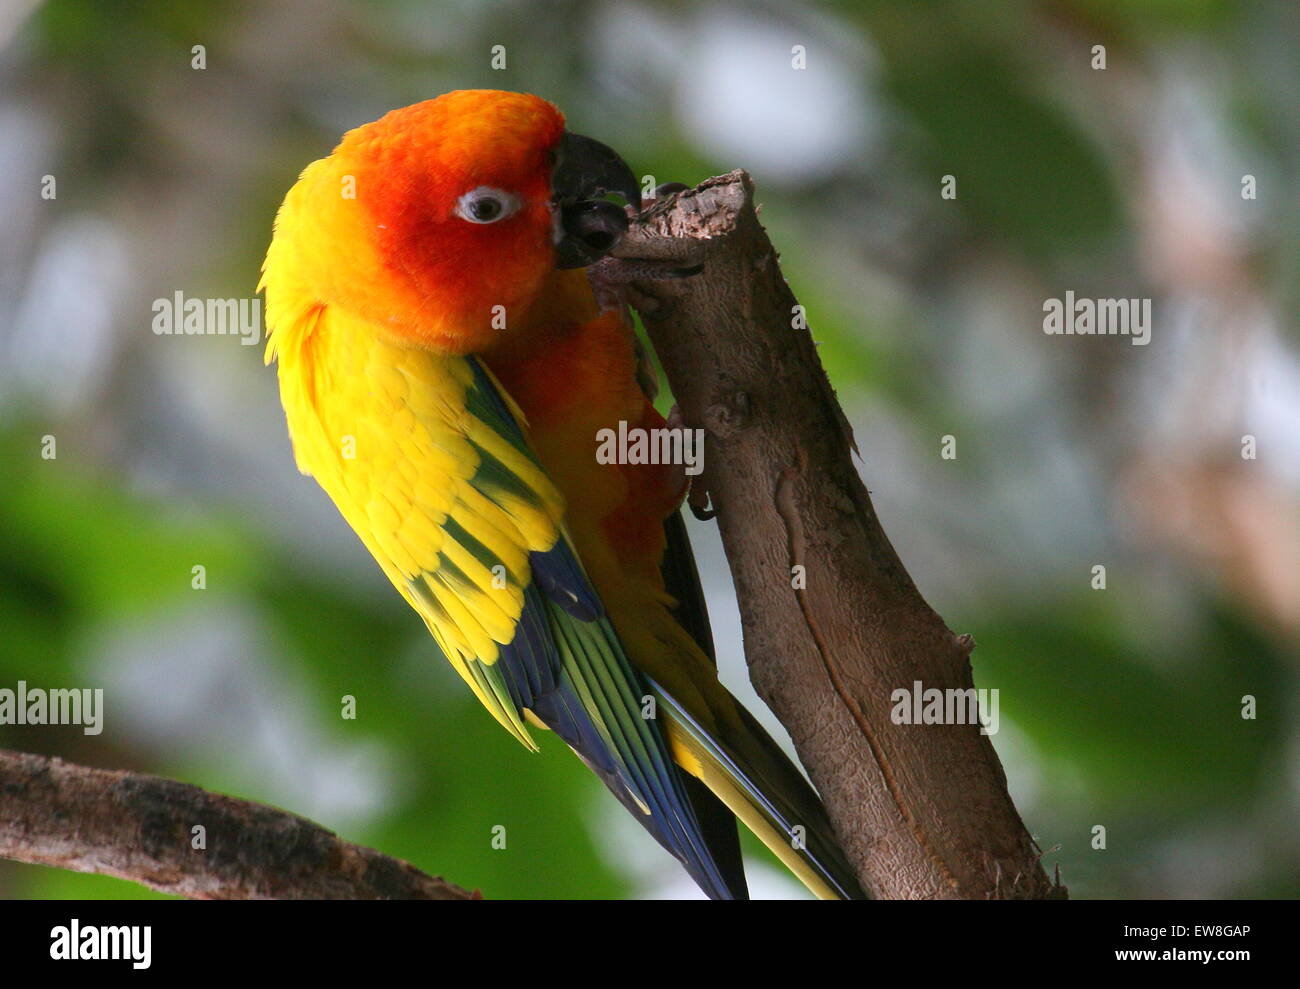 South American Sun Parakeet or Sun Conure (Aratinga solstitialis) looking for insects, clinging to a branch Stock Photo